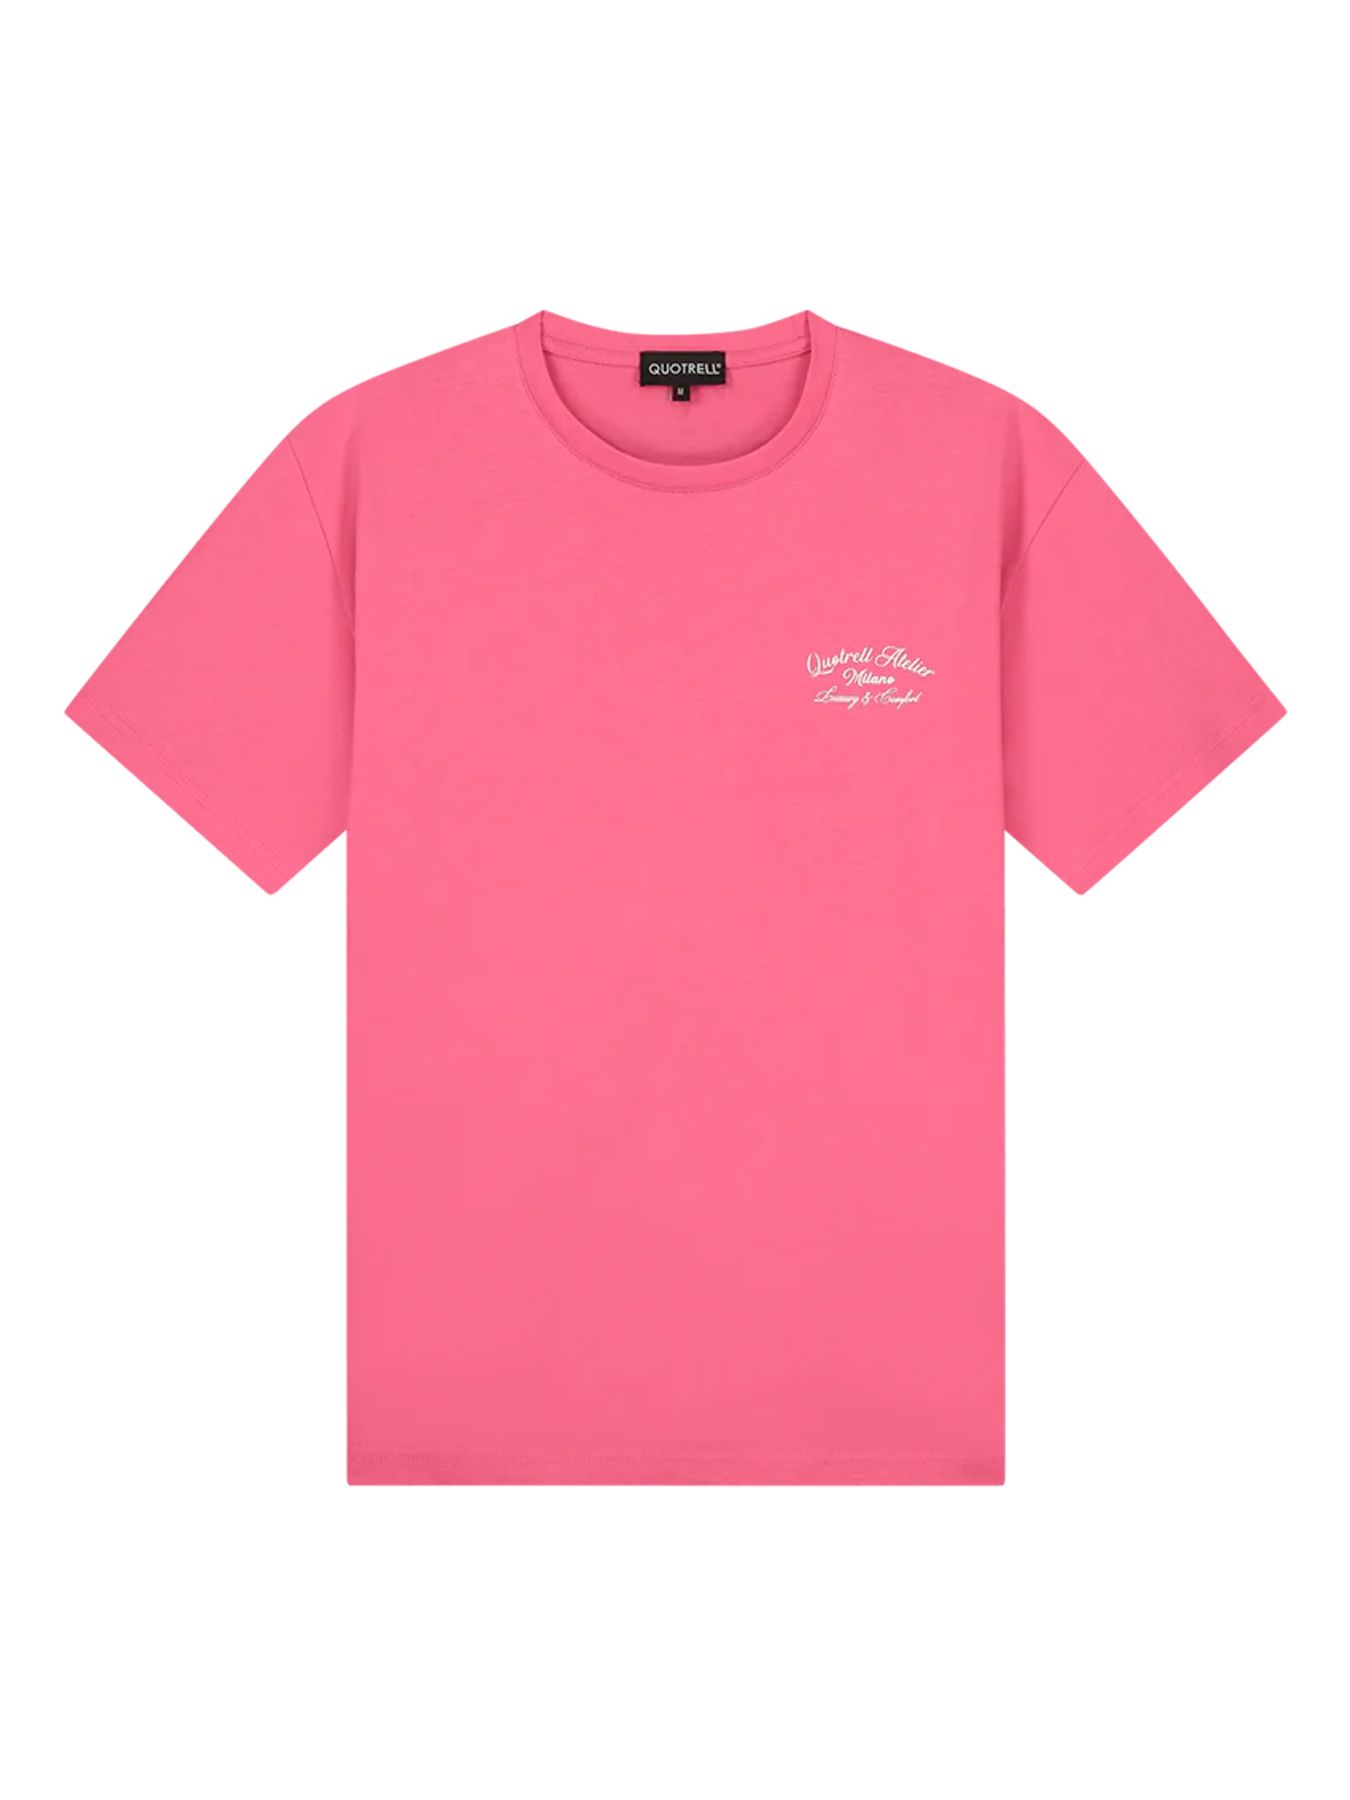 Quotrell Atelier milano t-shirt PINK 00103588-PI